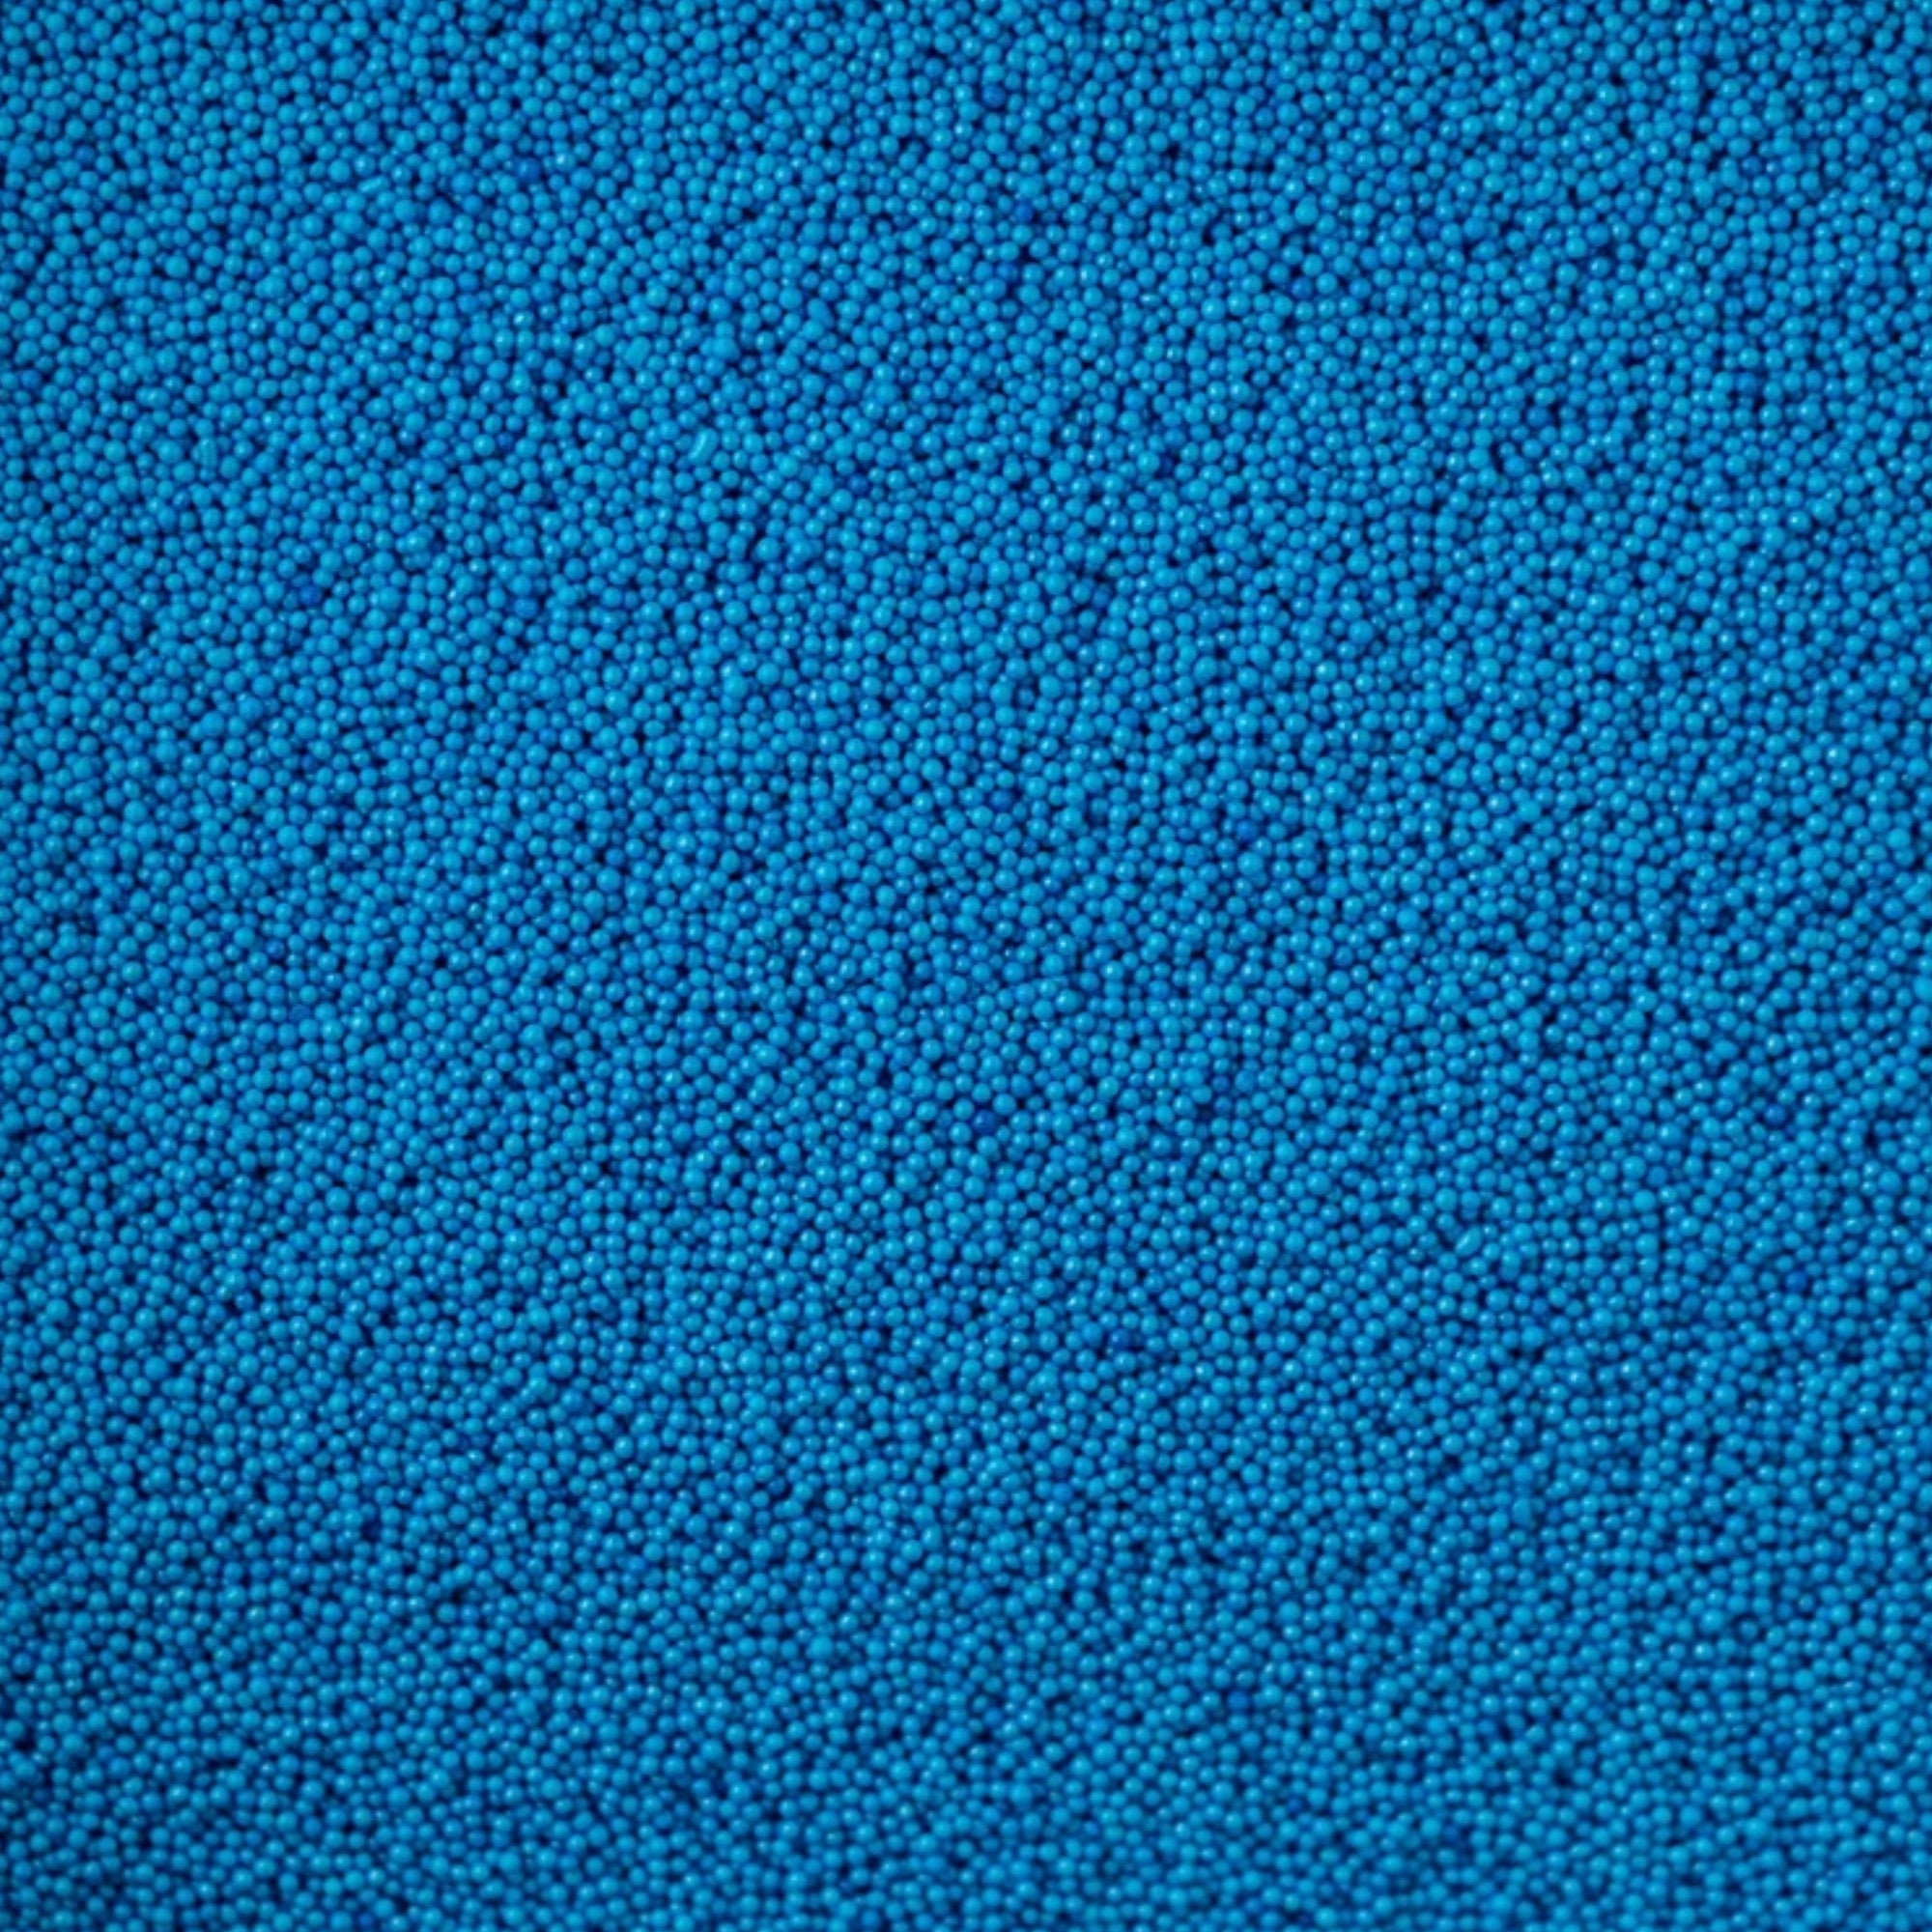 Blue Glimmer 100s & 1000s Cupcake / Cake Decoration Sprinkles Toppers